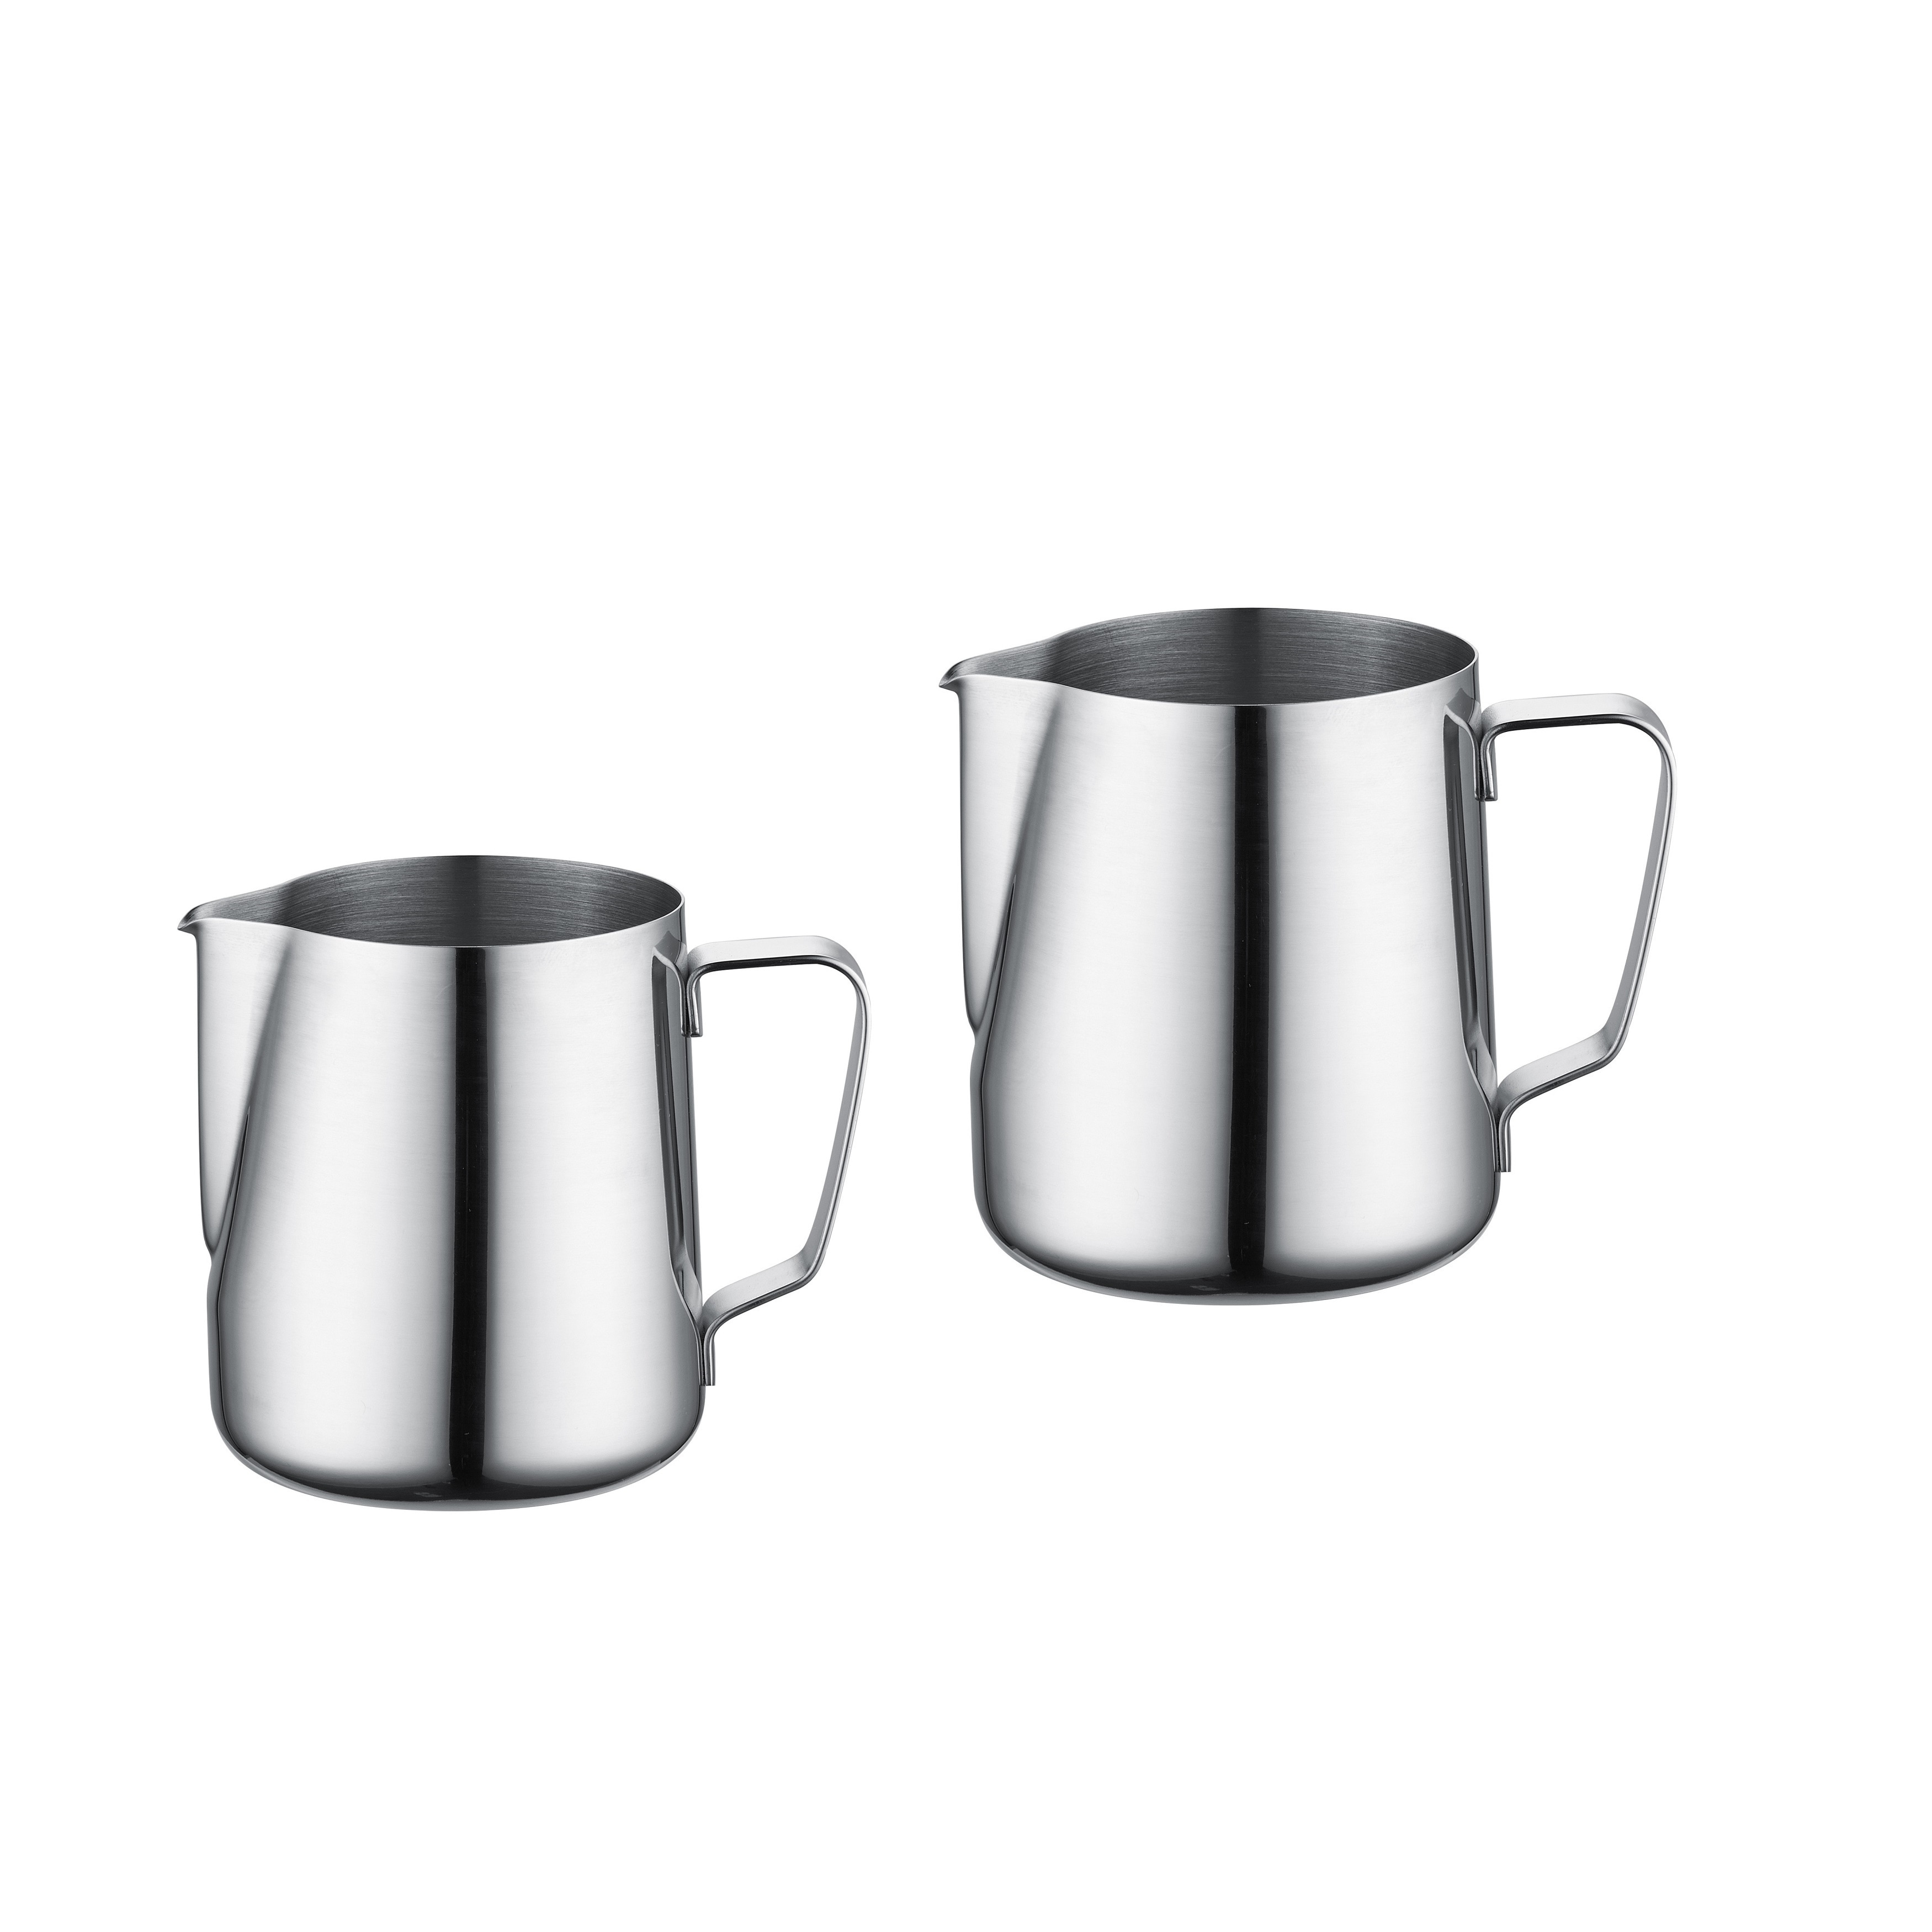 https://ak1.ostkcdn.com/images/products/16496733/Prime-Cook-Stainless-Steel-2-Piece-Milk-Frothing-Steaming-Pitcher-eafd87cf-51a0-4392-8681-c90b8bad5ff5.jpg